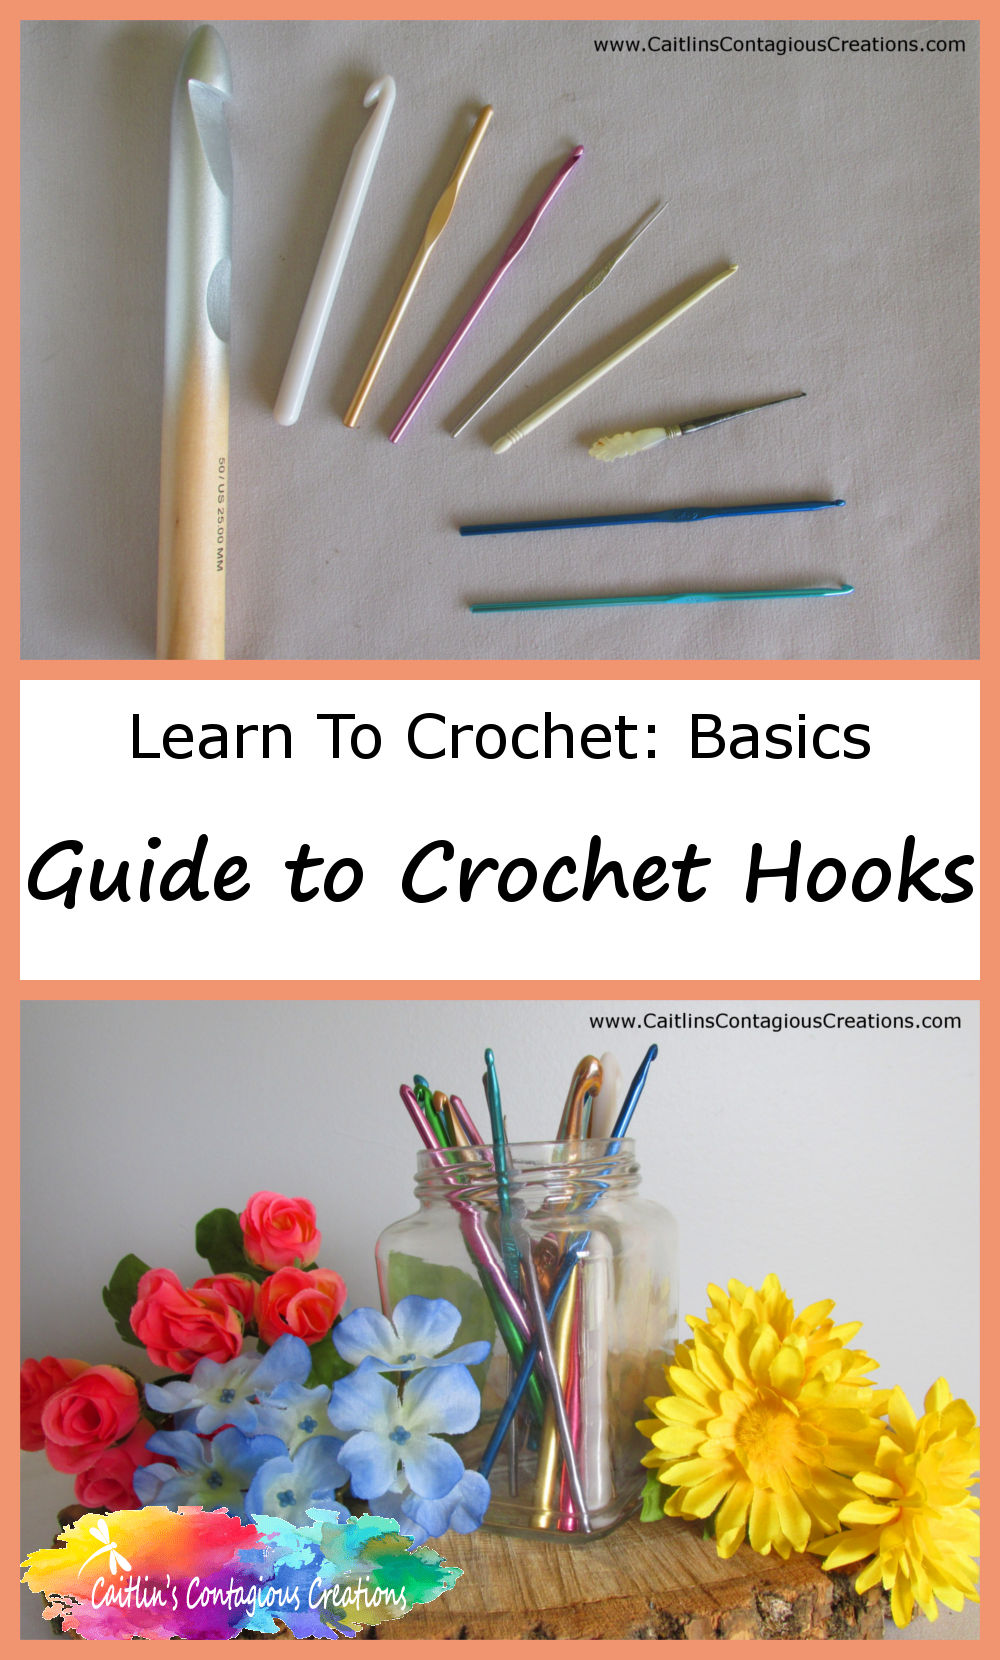 Guide to Crochet Hooks - Caitlin's Contagious Creations